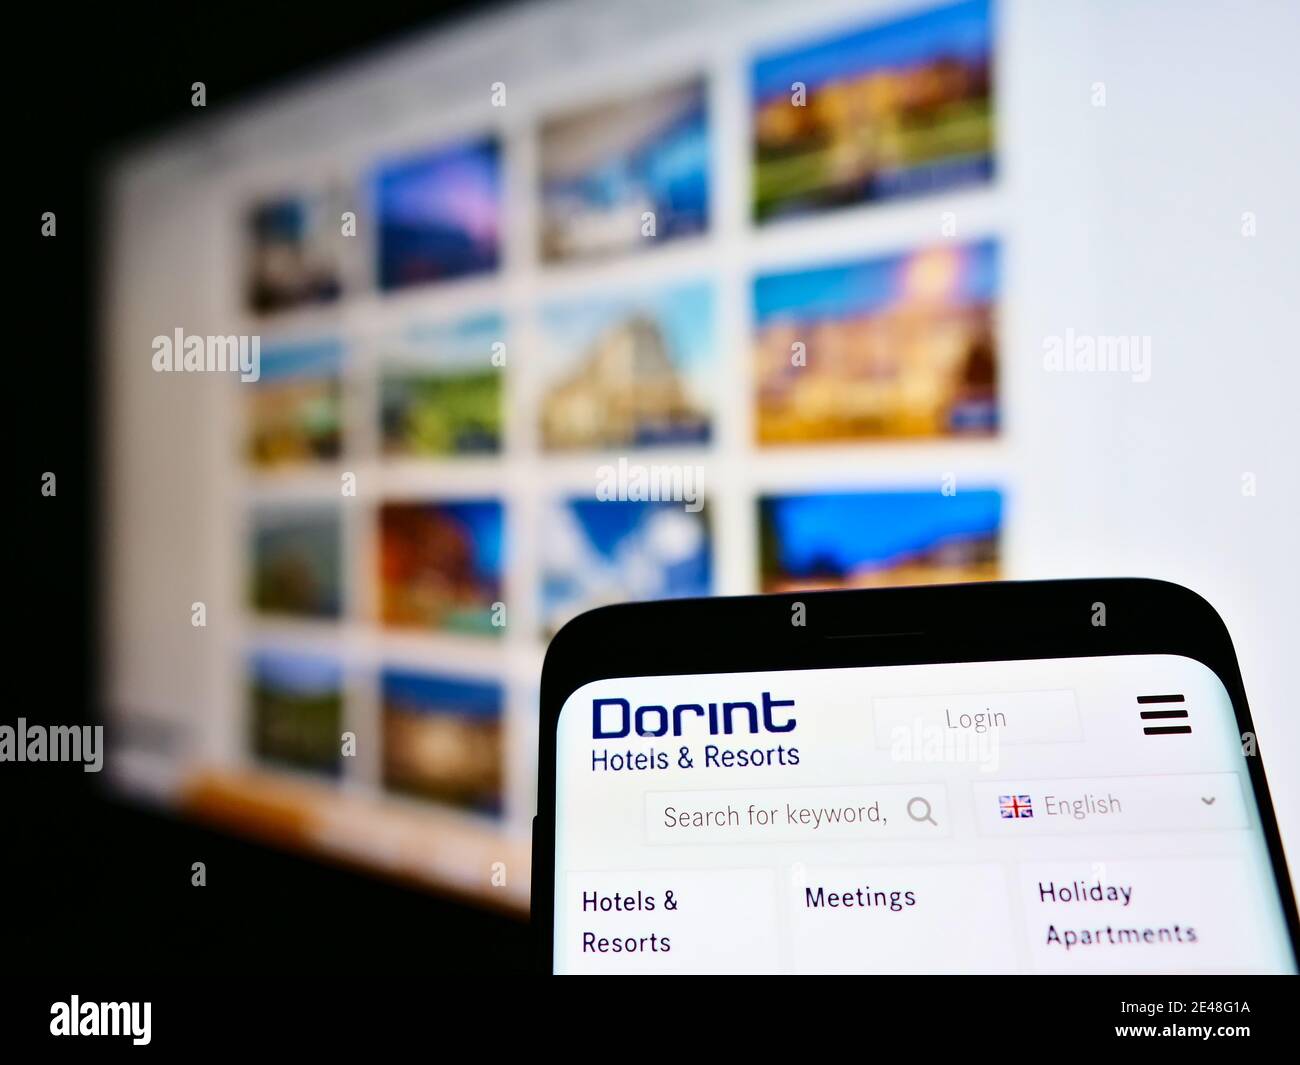 Logo of German hotel chain Dorint GmbH on smartphone display with company website in background. Focus on top center of mobile phone screen. Stock Photo